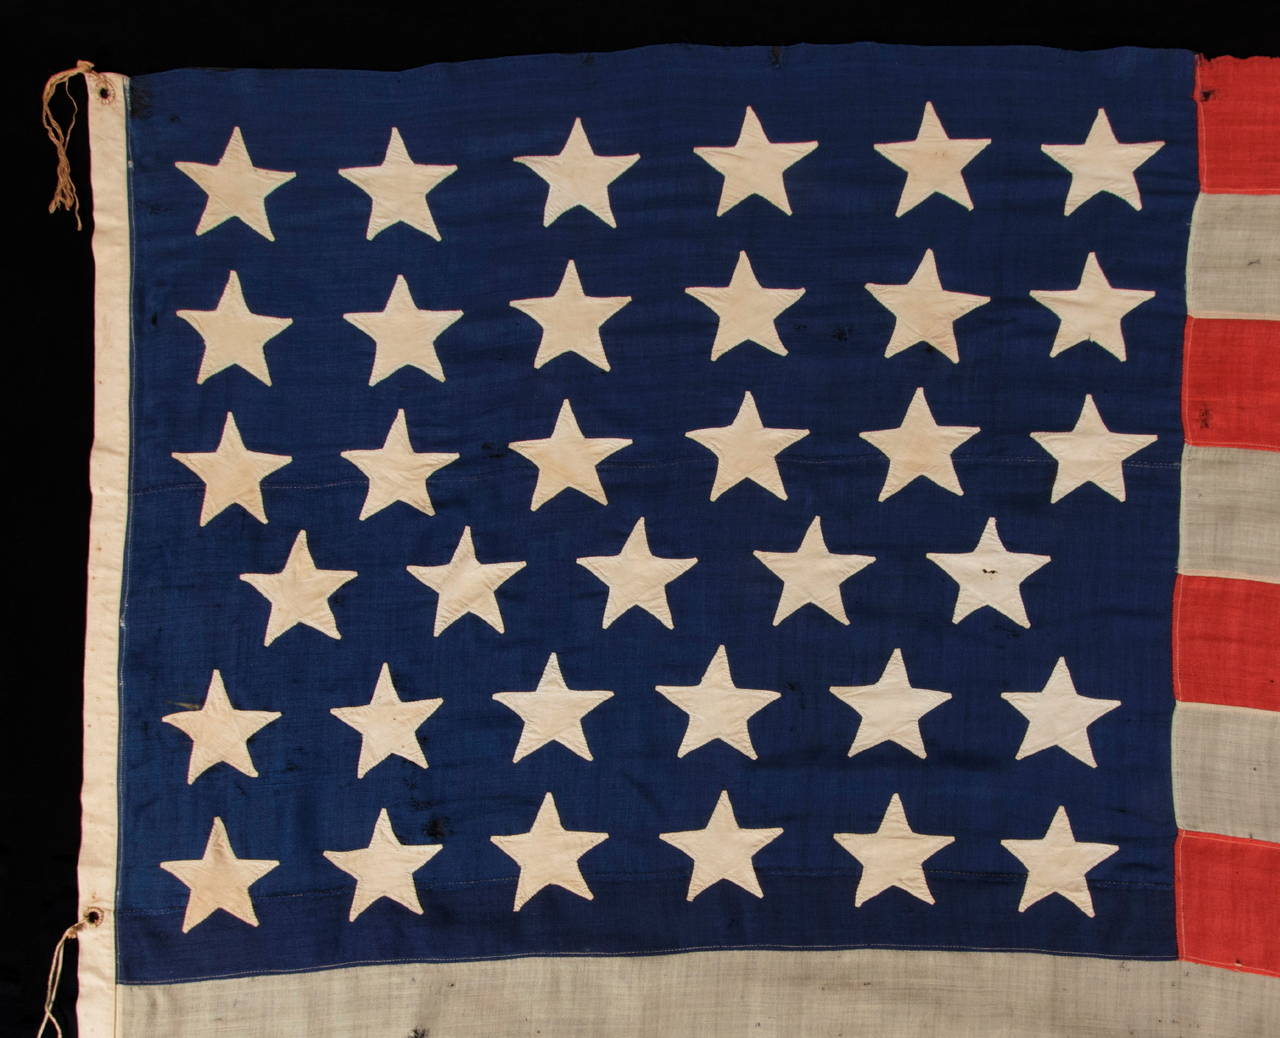 35 SINGLE-APPLIQUÉD STARS ON A CIVIL WAR PERIOD FLAG, SIGNED BY A SURGEON FROM SARATOGA SPRINGS, NEW YORK WHO SERVED WITH THE 29TH NEW YORK STATE MILITIA, WHICH MUSTERED OUT ON JUNE 20TH, 1863, THE EXACT DAY UPON WHICH WEST VIRGINIA BECAME THE 35TH